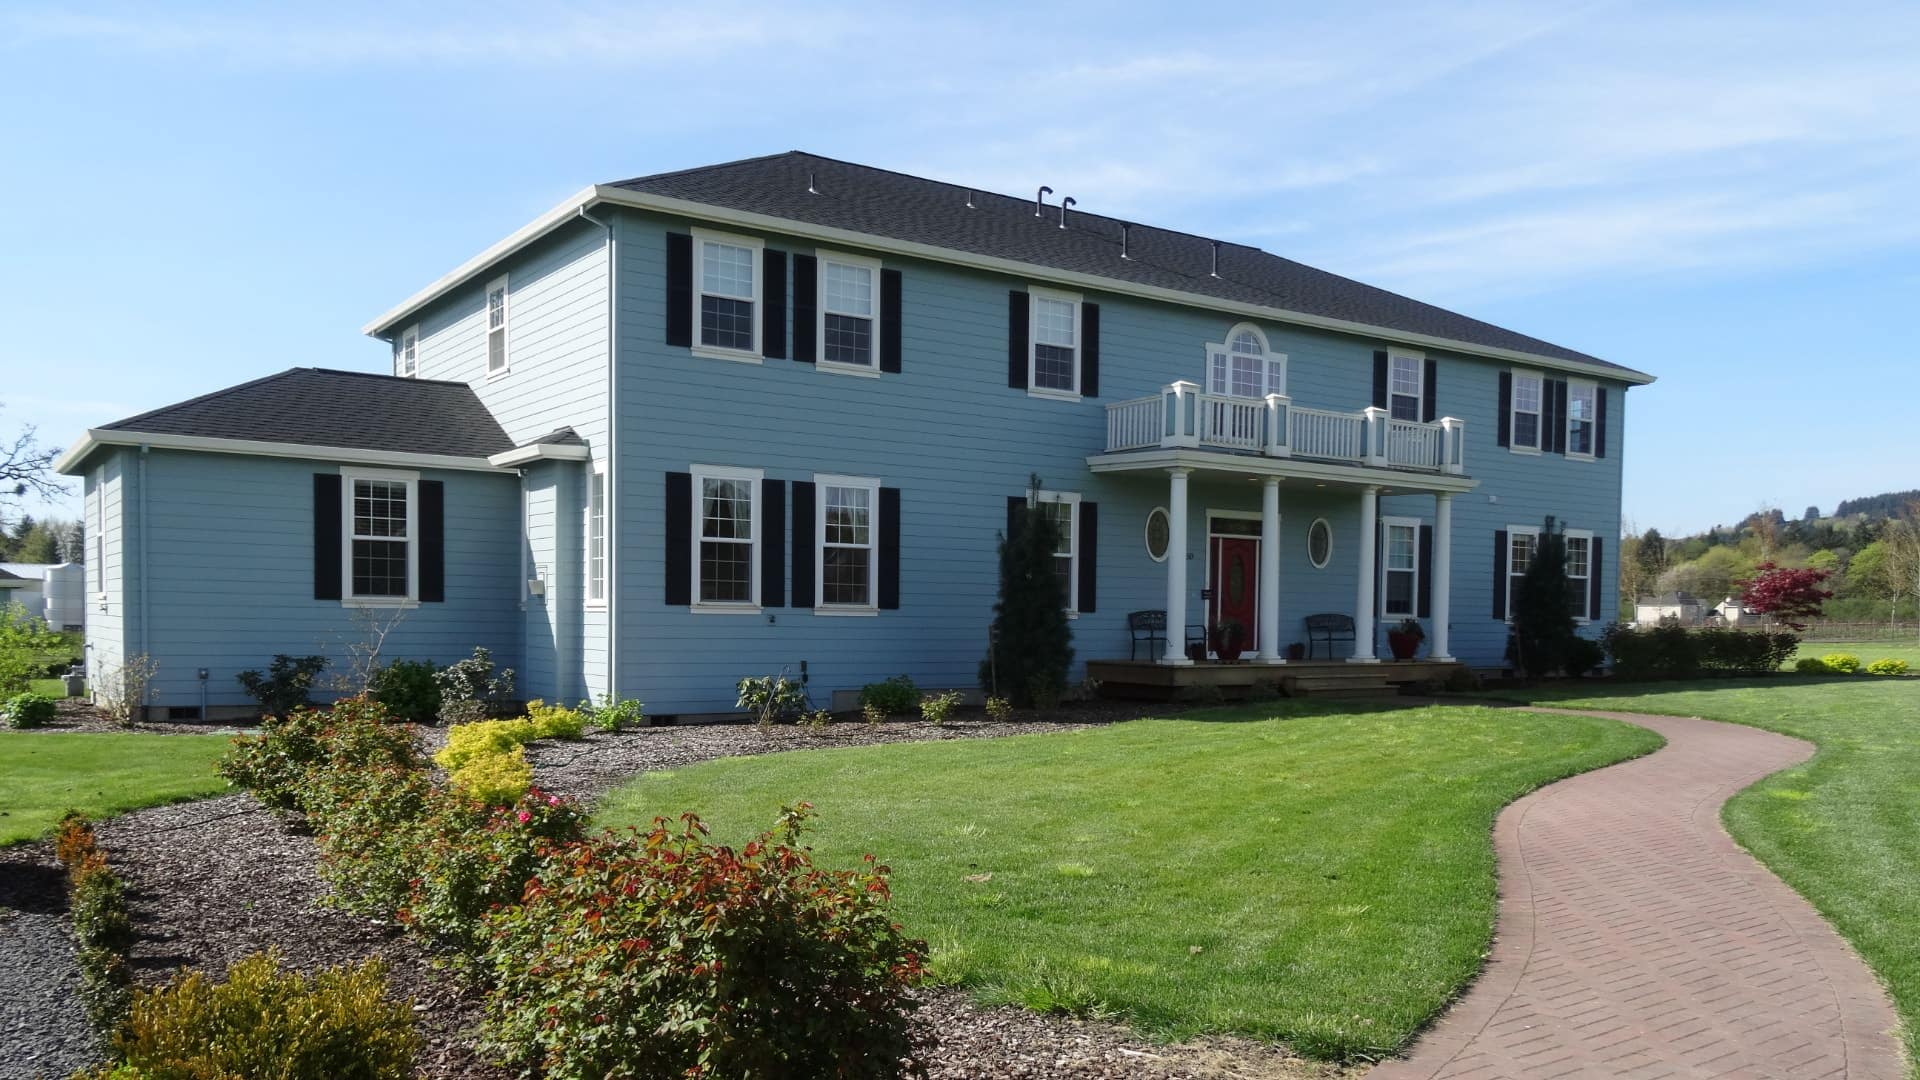 Exterior view of the property painted light blue with white trim and dark shutters surrounded by green grass, bushes and shrubs